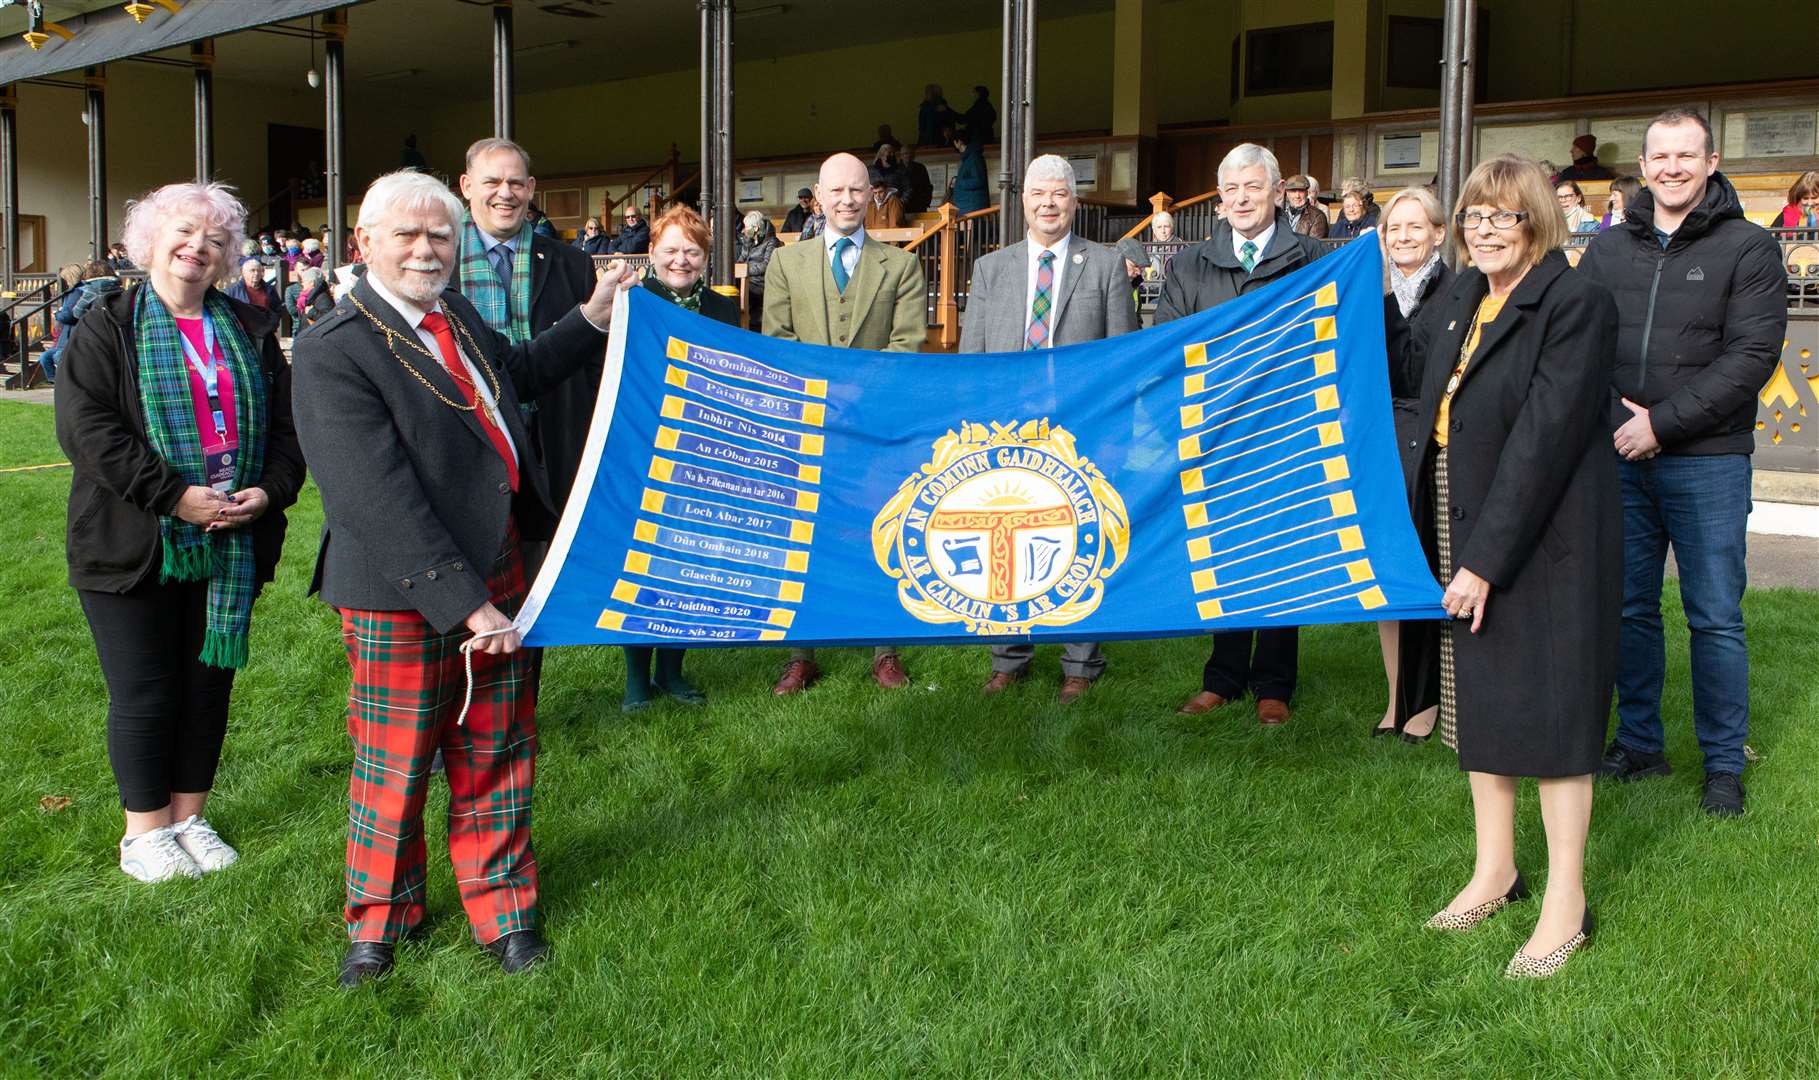 The Mòd flag was handed over to the city of Perth (hosts of the Royal National Mòd 2022) at the massed choirs event at the Northern Meeting Park.